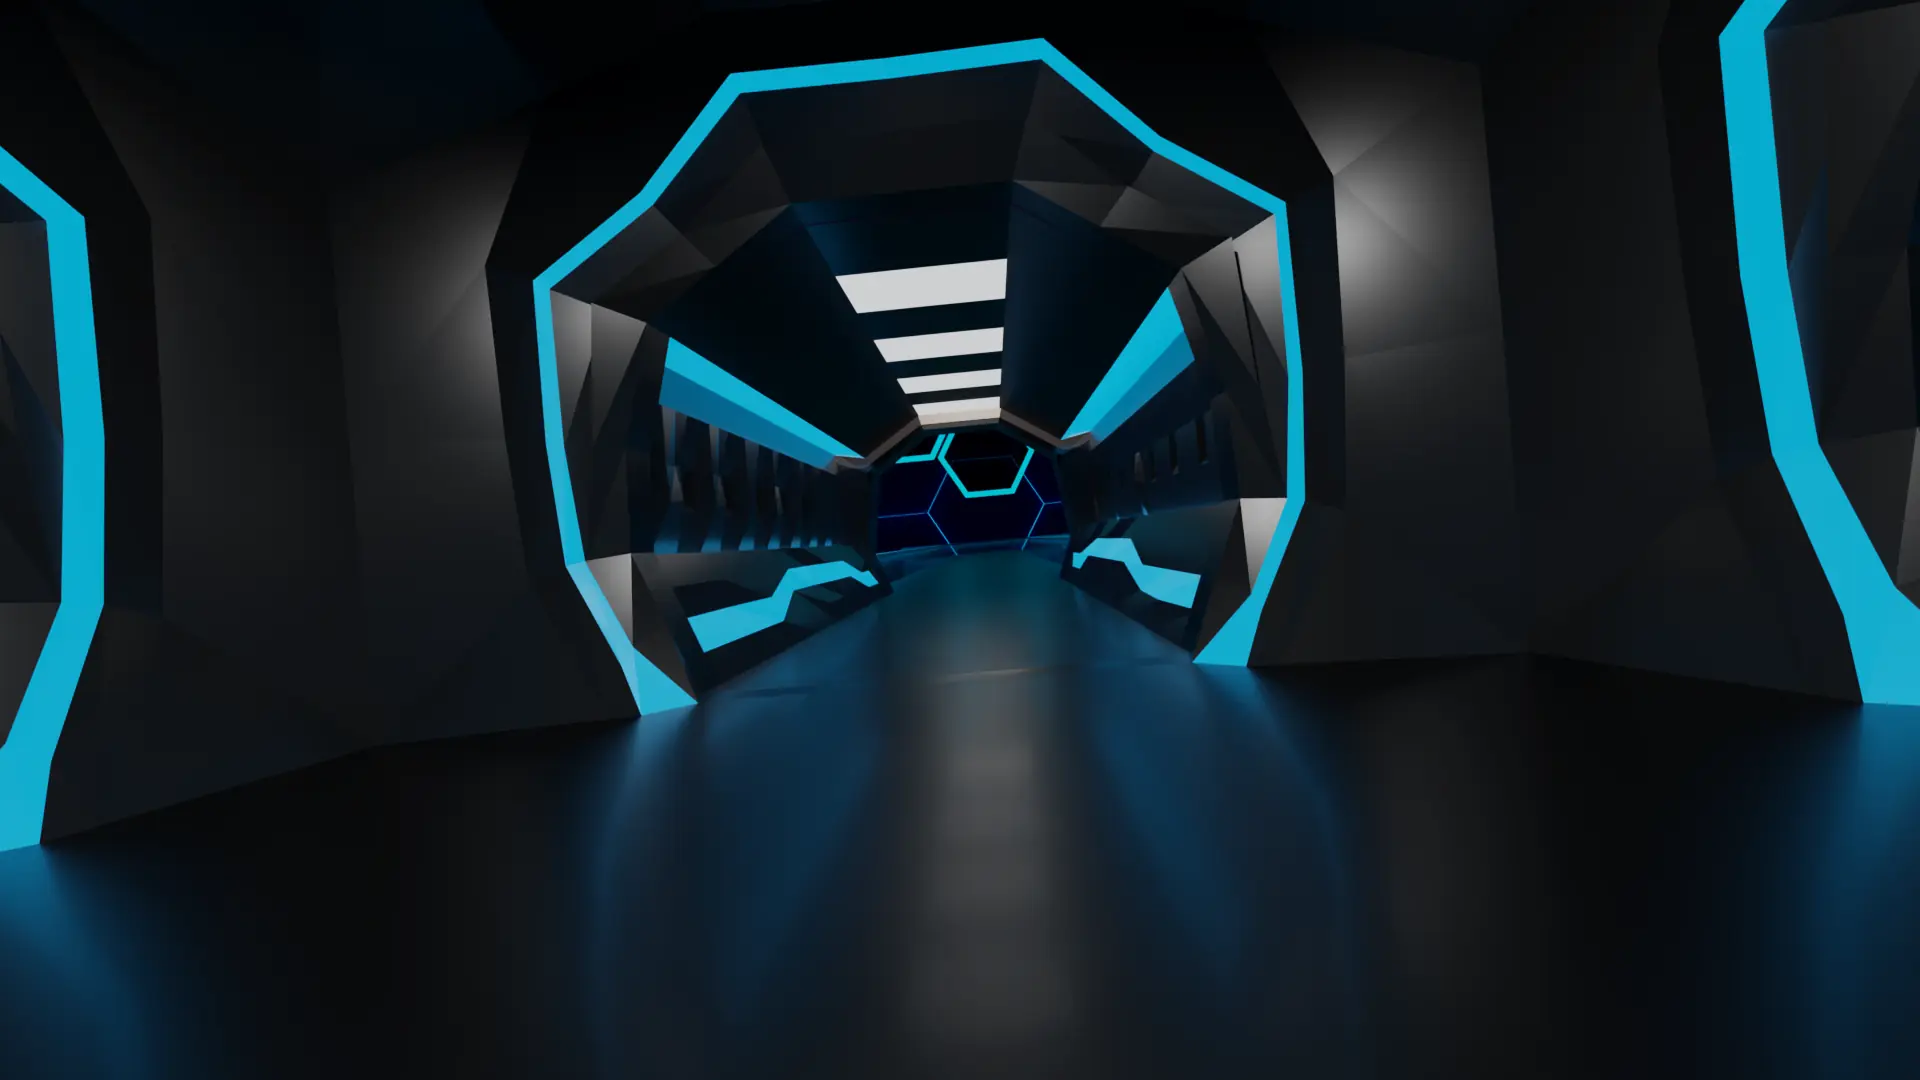 3D concept art for a sci-fi styled hallway